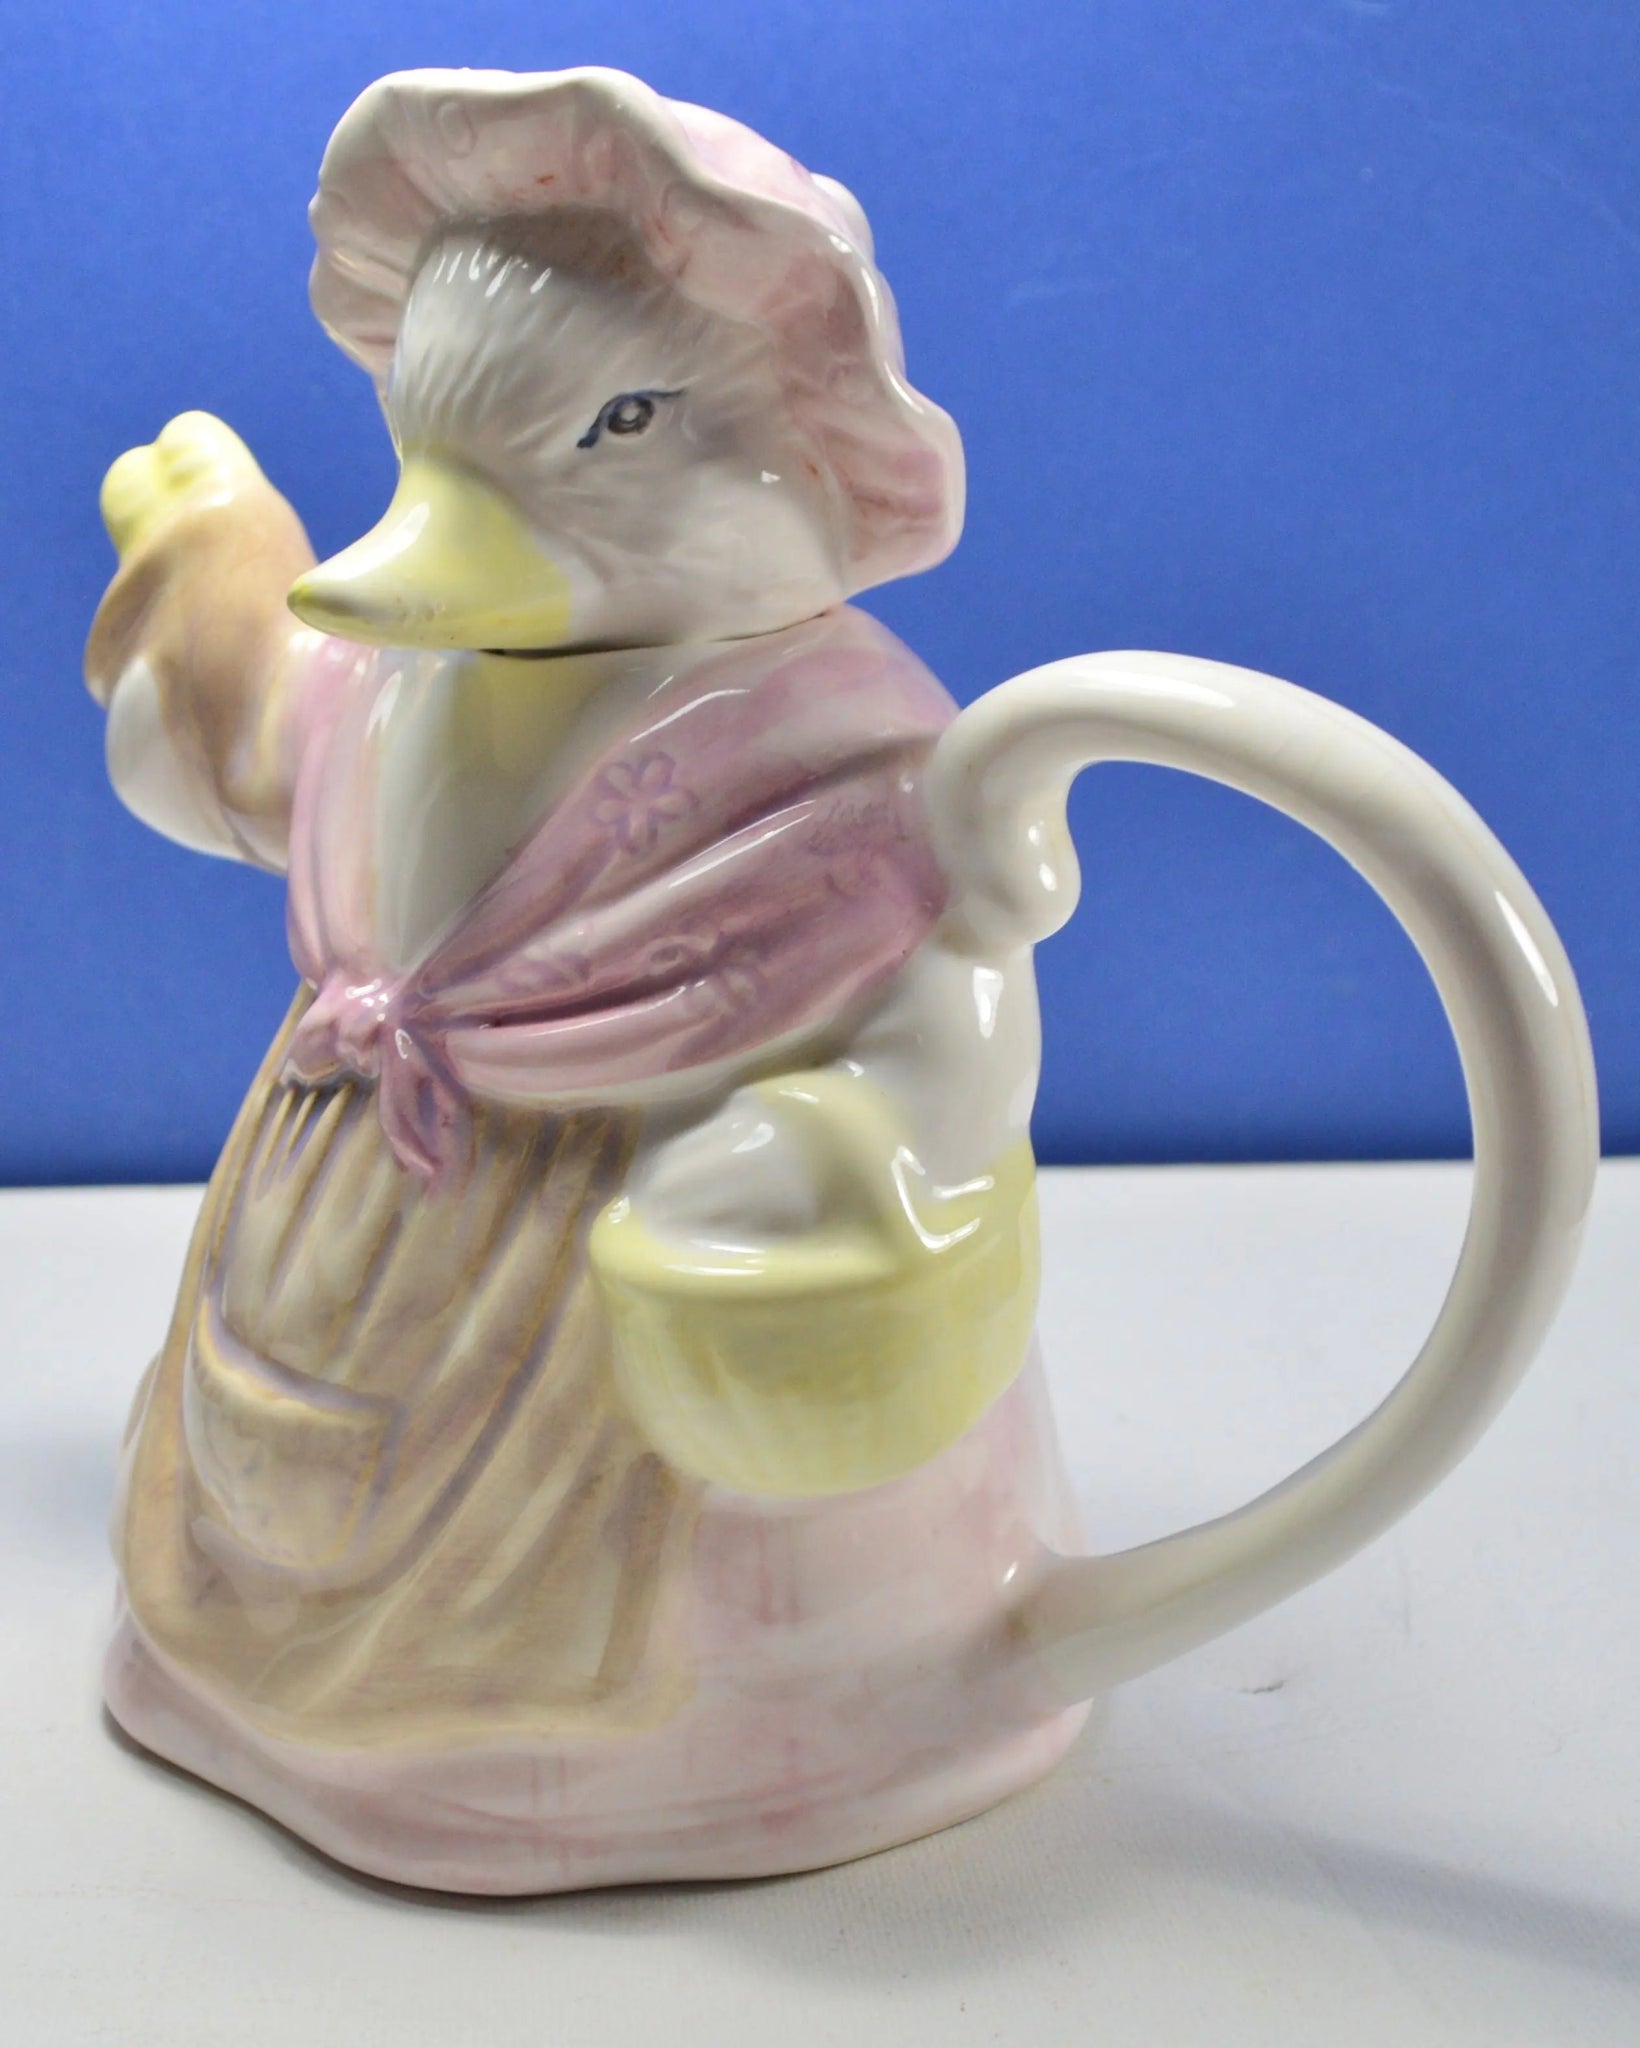 ORNAMENTAL DUCK TEAPOT(PREVIOUSLY OWNED)FAIRLY GOOD CONDITION - TMD167207